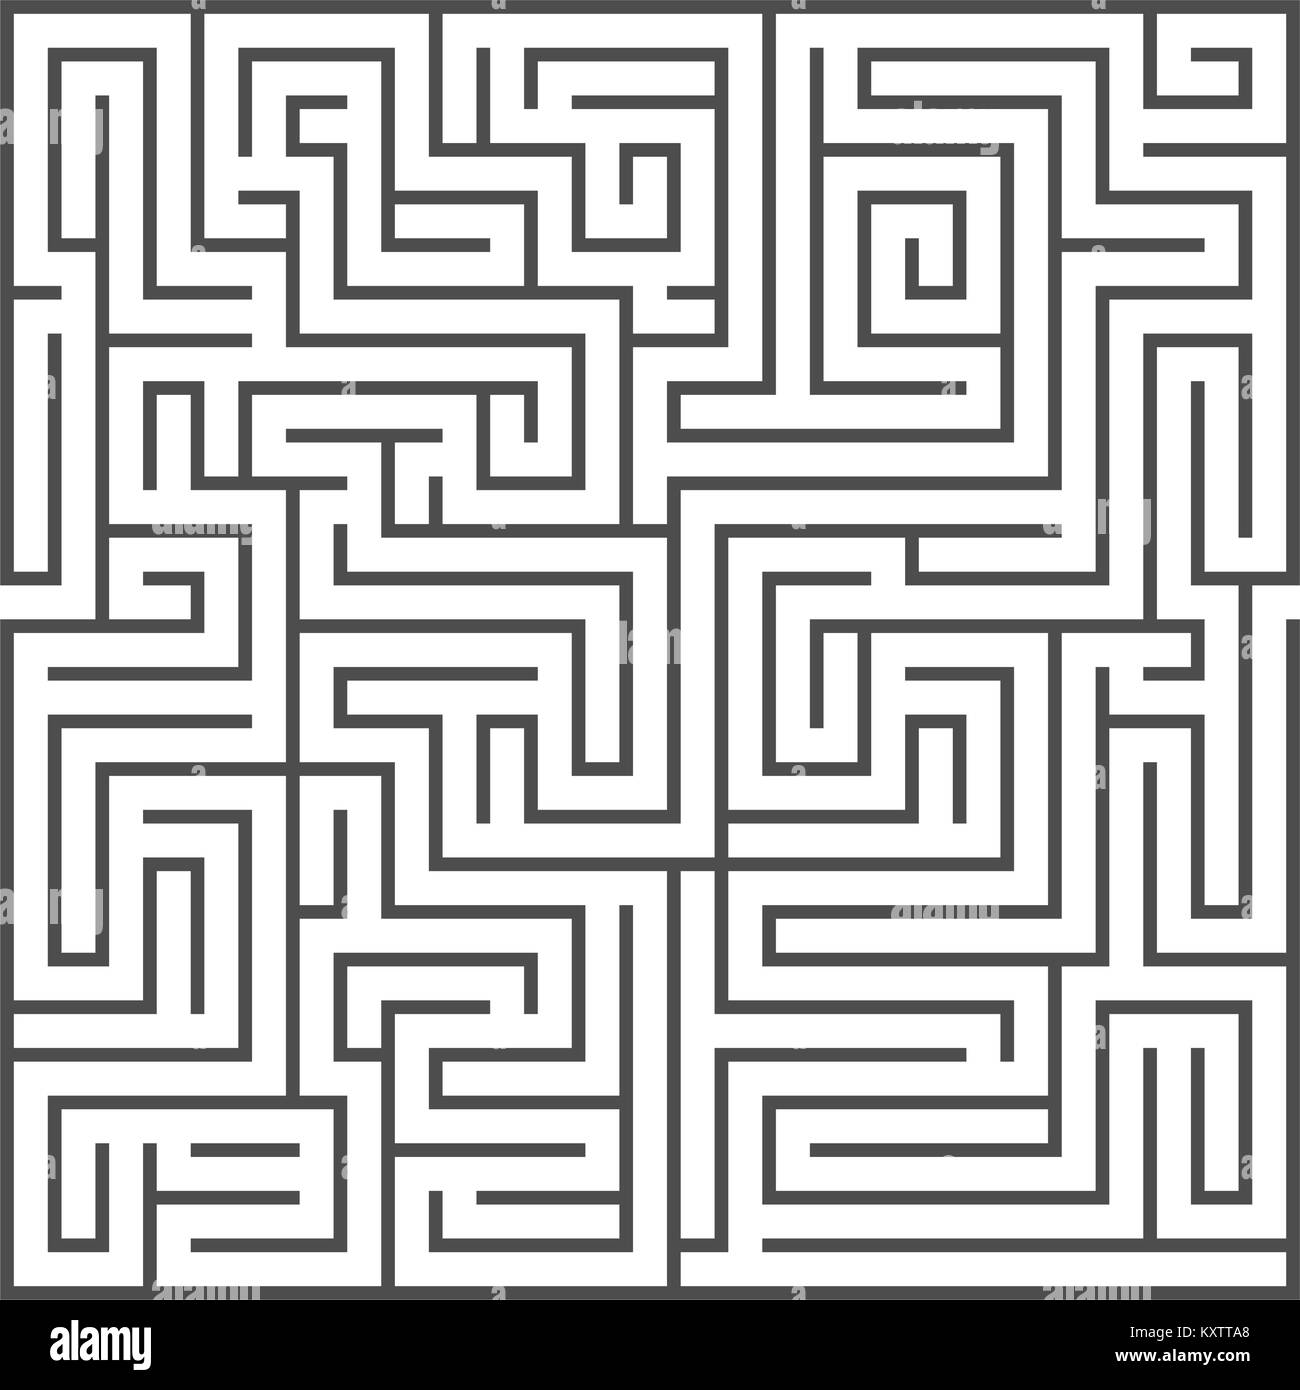 Square maze isolated on white background. Medium complexity Stock Vector